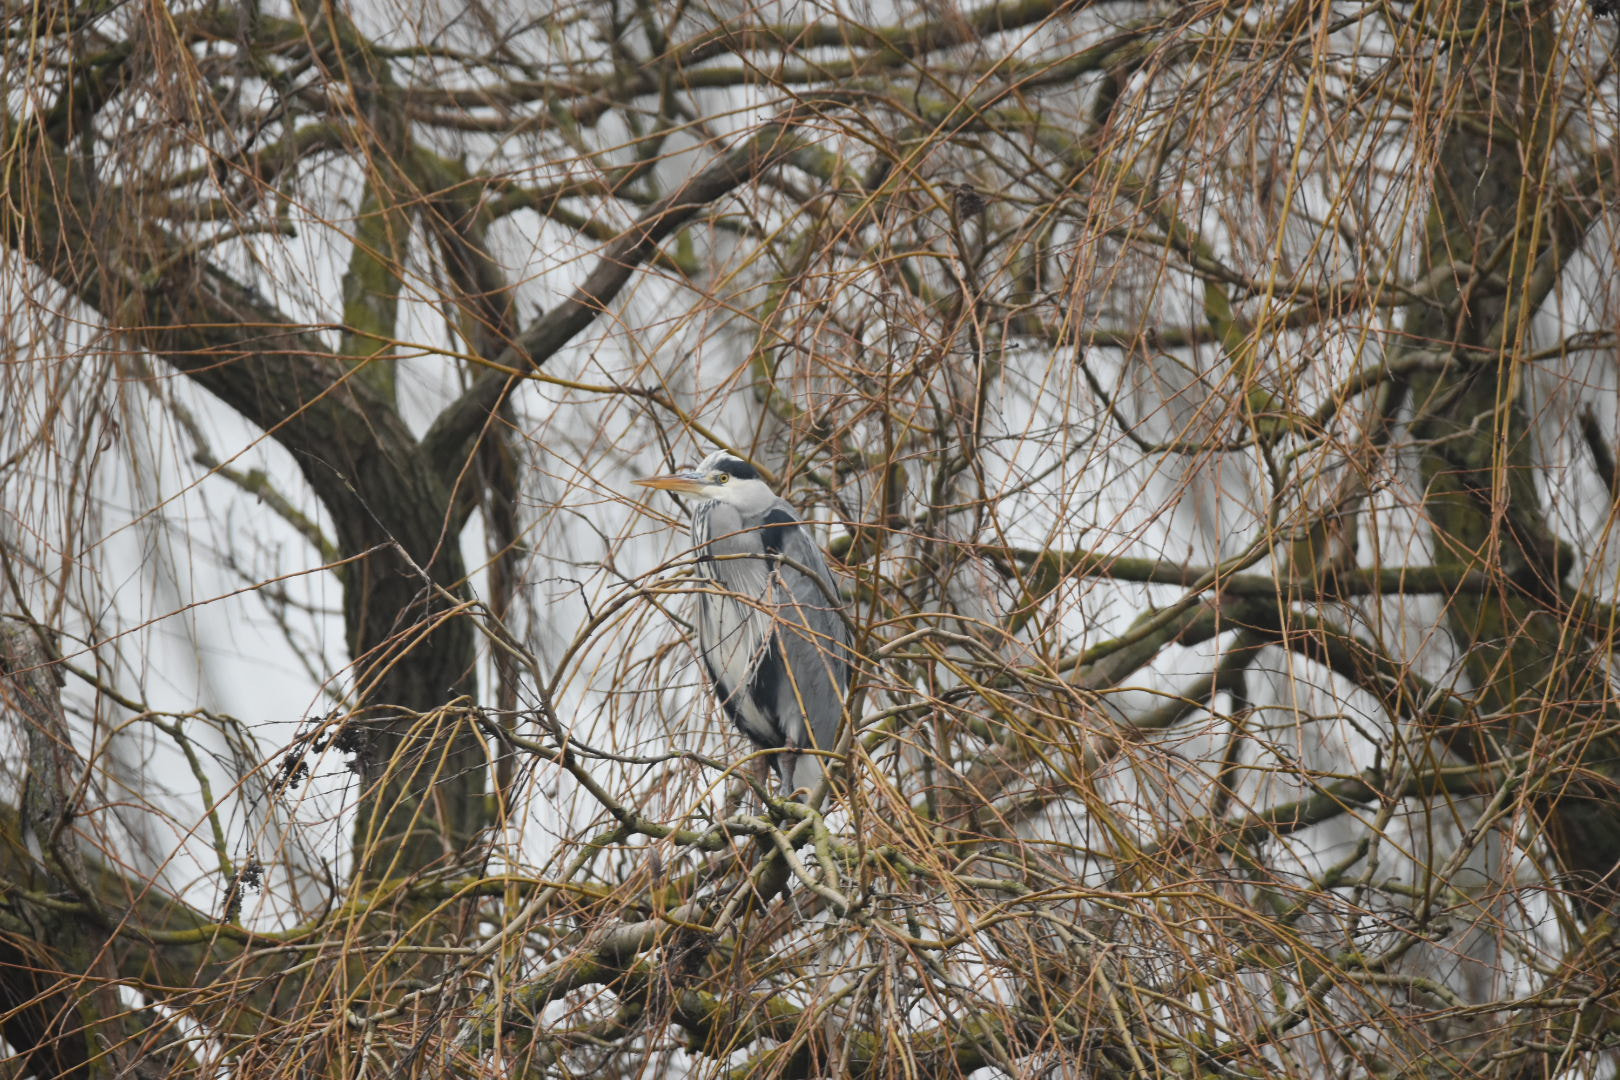 Nikon D5500 + Sigma 150-600mm F5-6.3 DG OS HSM | C sample photo. Heron in willow photography